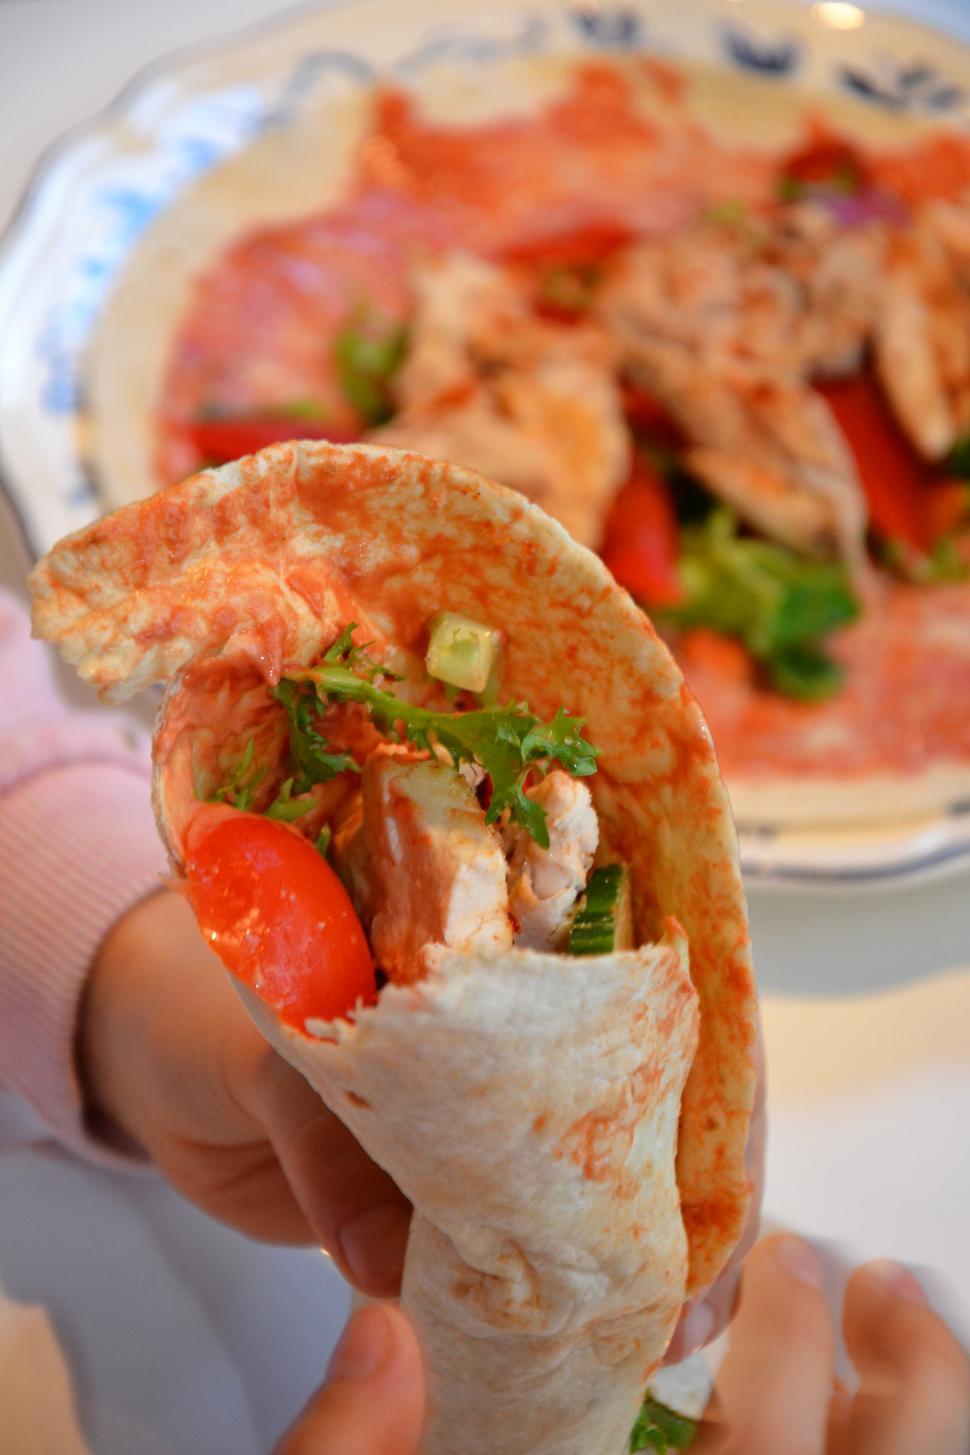 Free Image of Wrap of Chicken with vegetables 